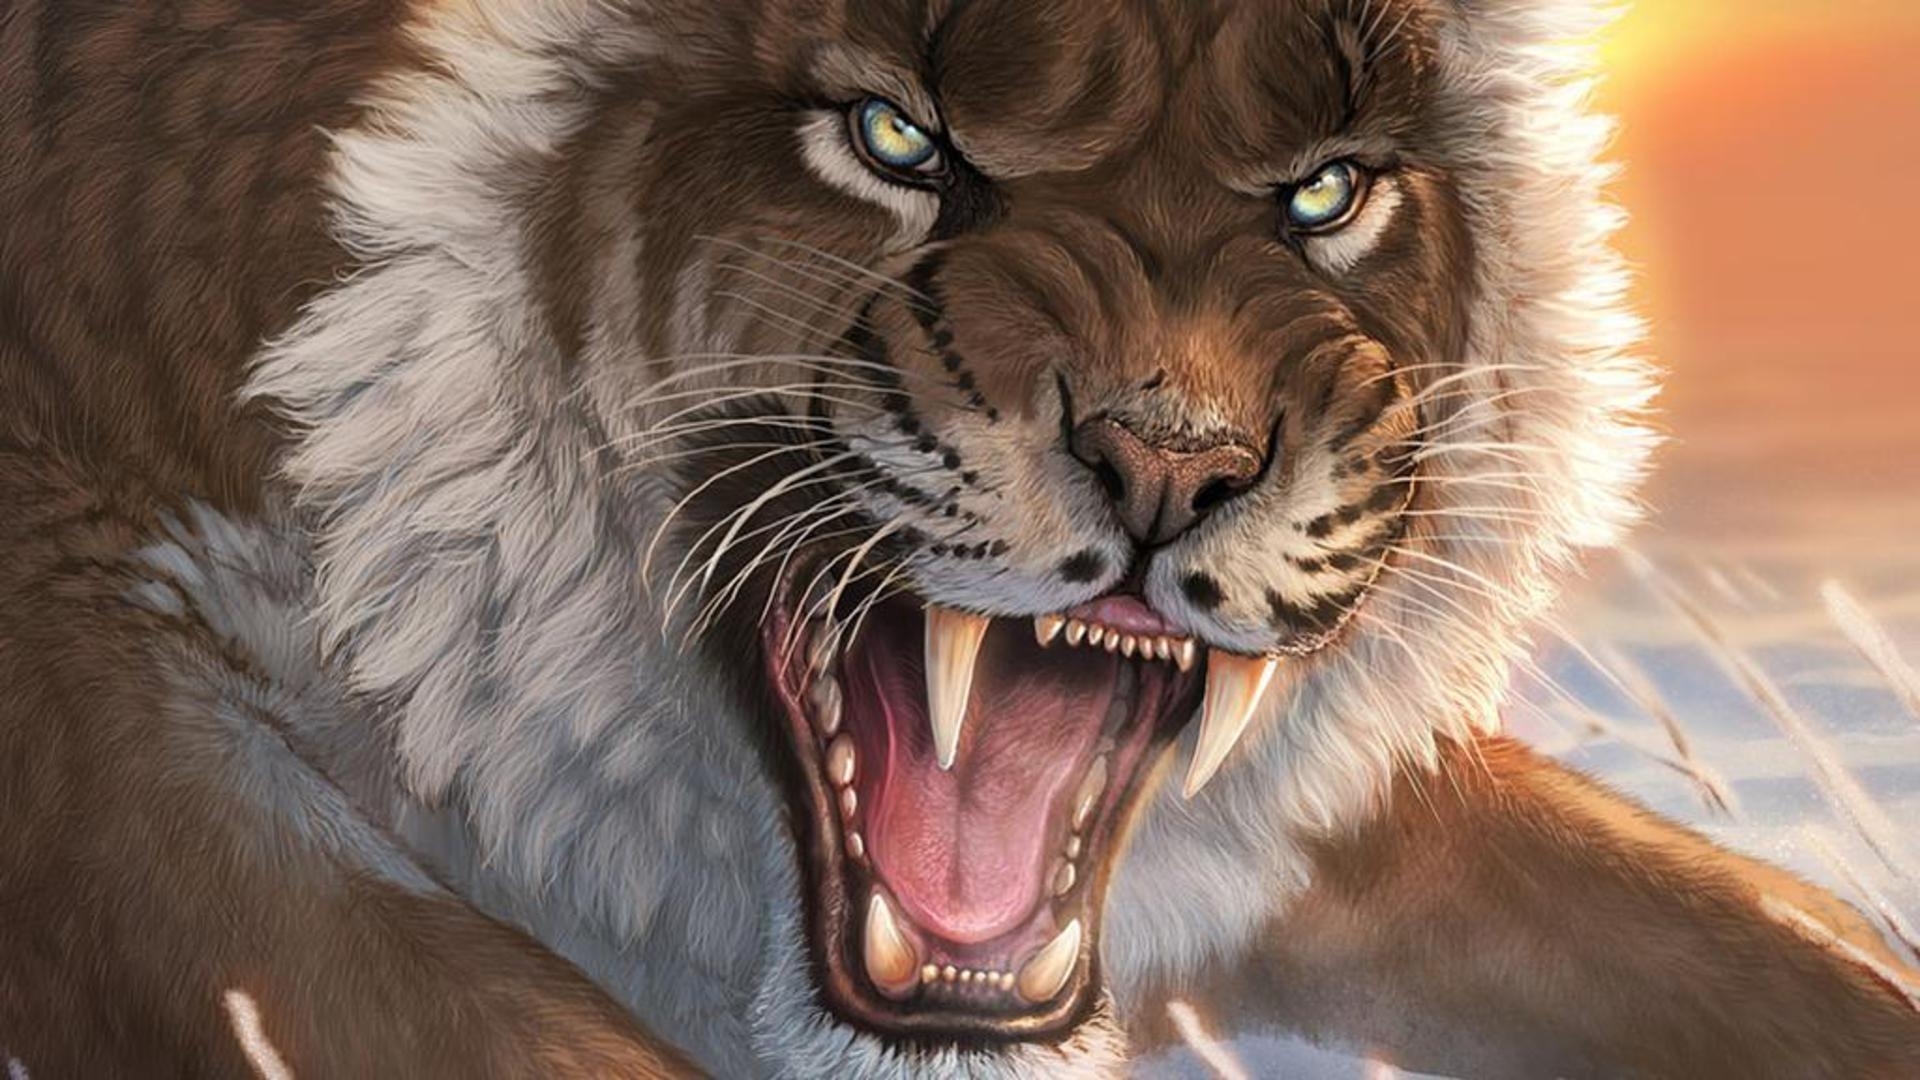 10 New Saber Tooth Tiger Wallpaper FULL HD 1080p For PC Background